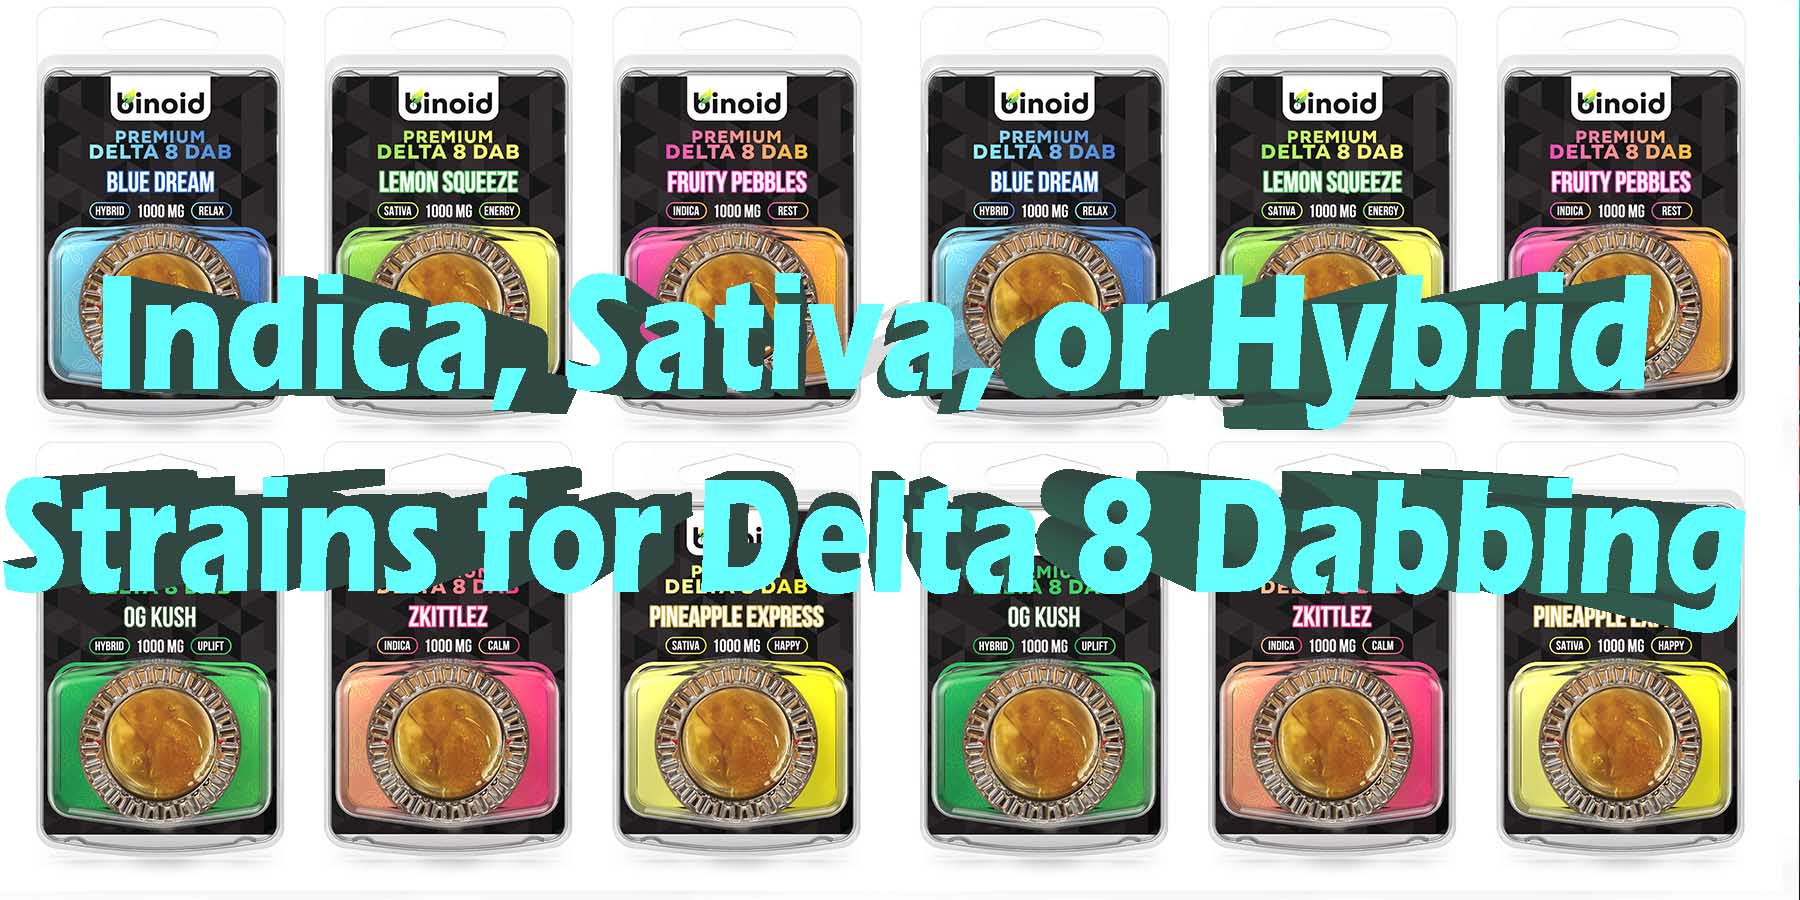 Indica Sativa or Hybrid Strains for Delta 8 Dabbing WhereToGet HowToGetNearMe BestPlace LowestPrice Coupon Discount For Smoking Best High Smoke Shop Online Near Me Strongest Binoid